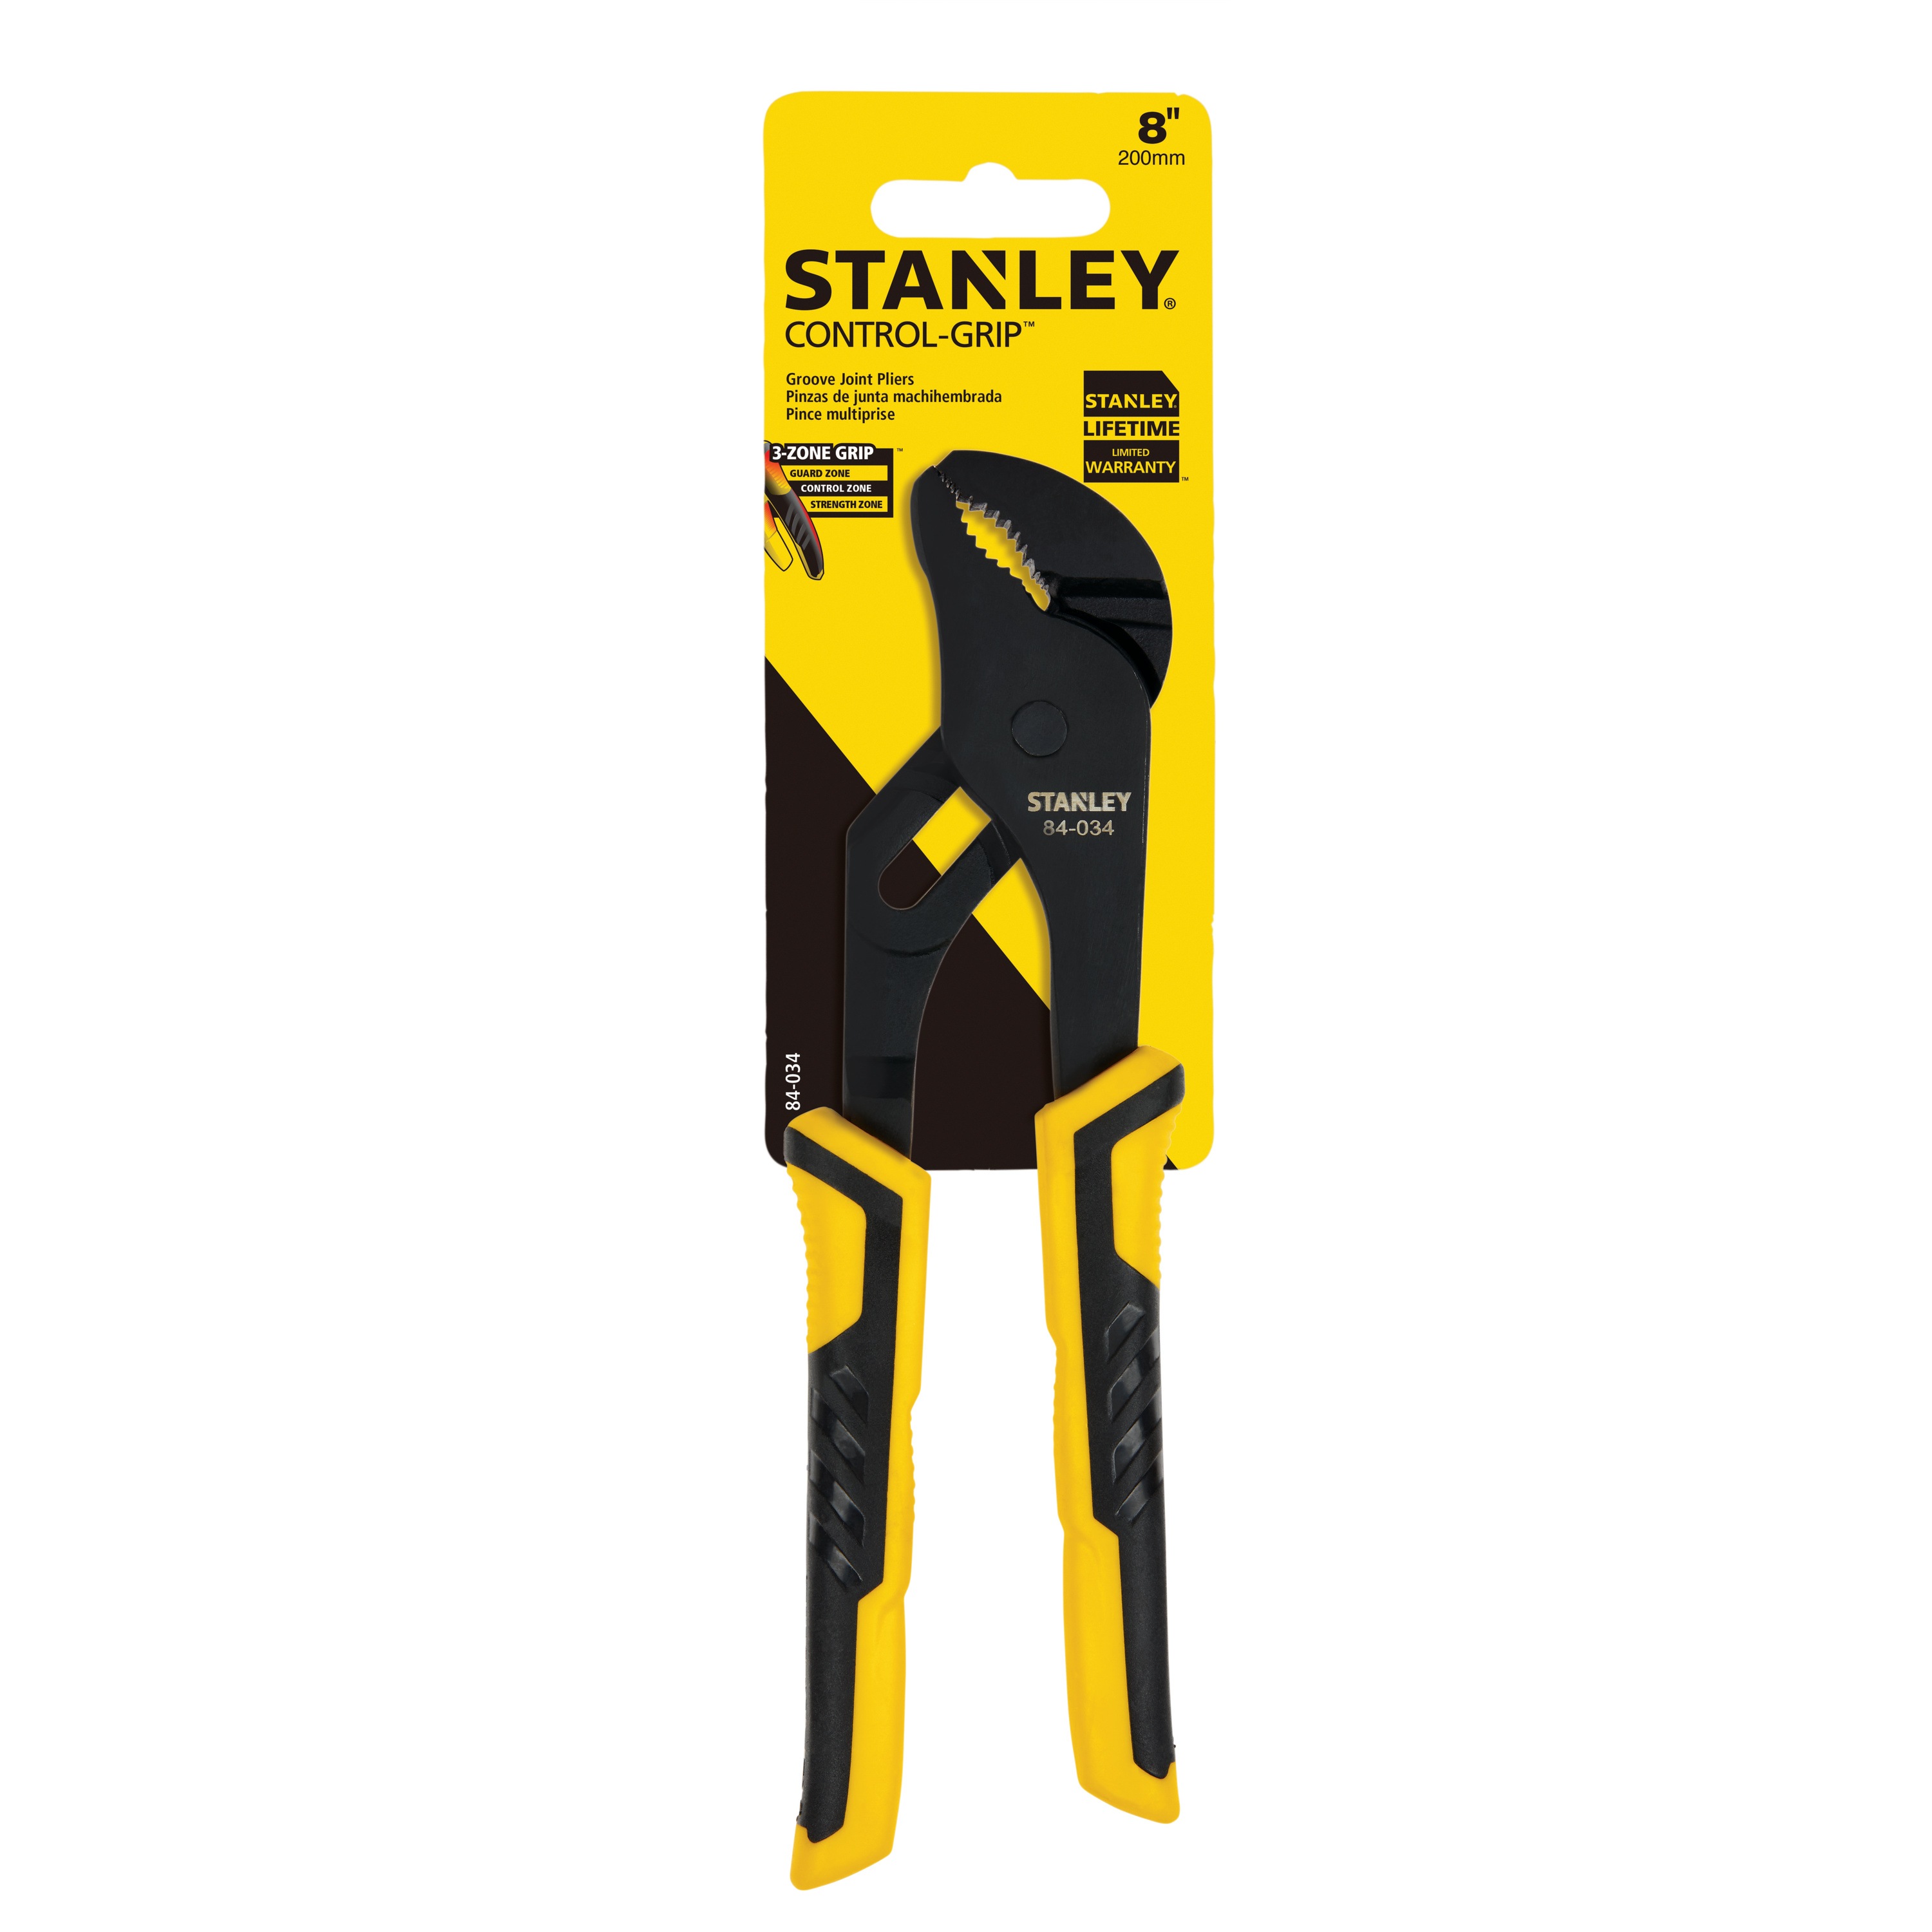 Stanley Tools - 8 in Groove Joint Pliers - 84-034